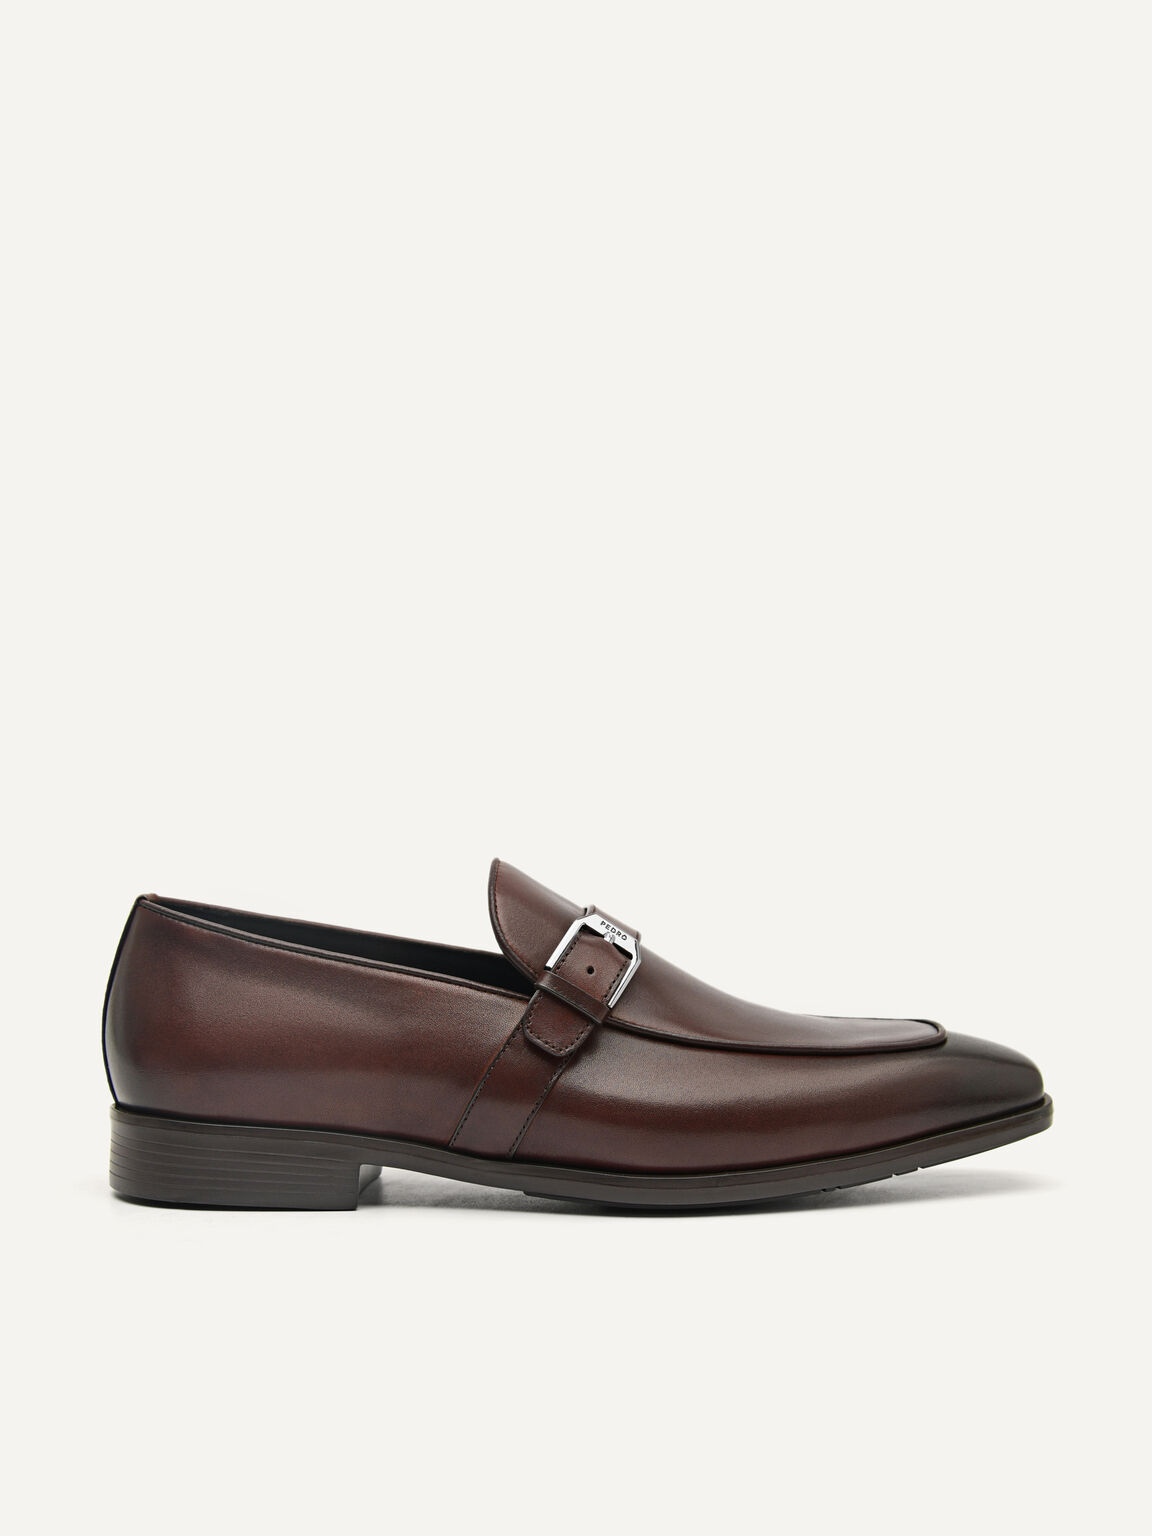 Brando Leather Loafers, Brown